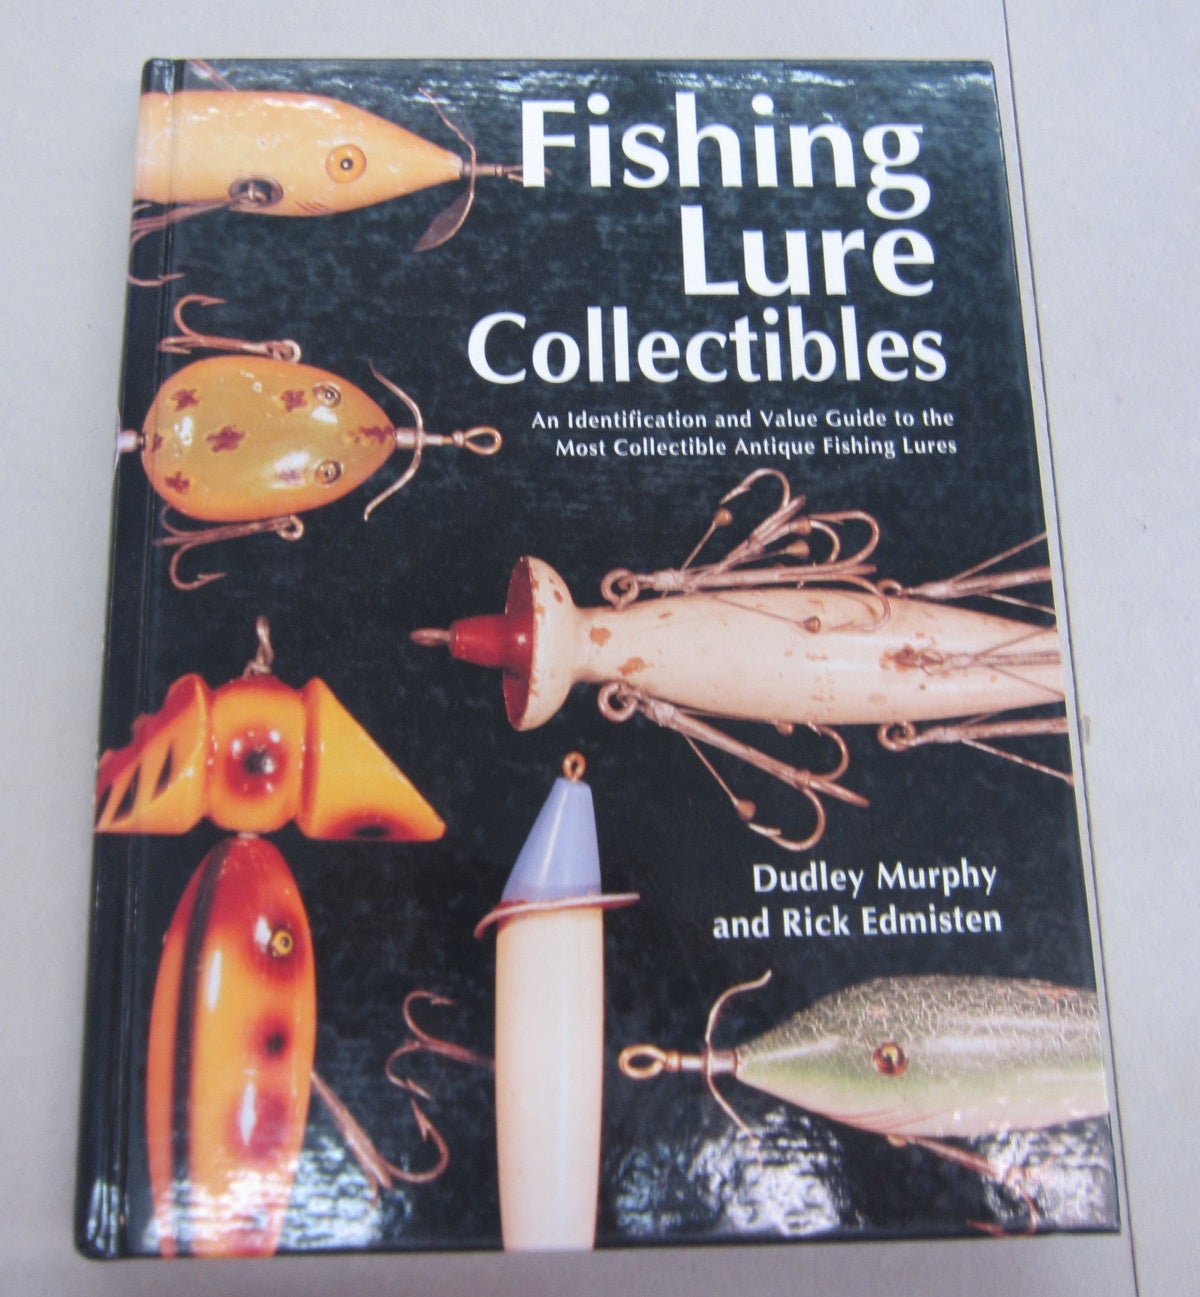 Fishing Lure Collectibles, Vol. 1: An Identification and Value Guide to the  Most Collectible Antique Fishing Lures… by Rick Dudley; Edmisten -  Hardcover - 2000-08-01 - from Rebooksellers (SKU: 220650-5497A-1307B)